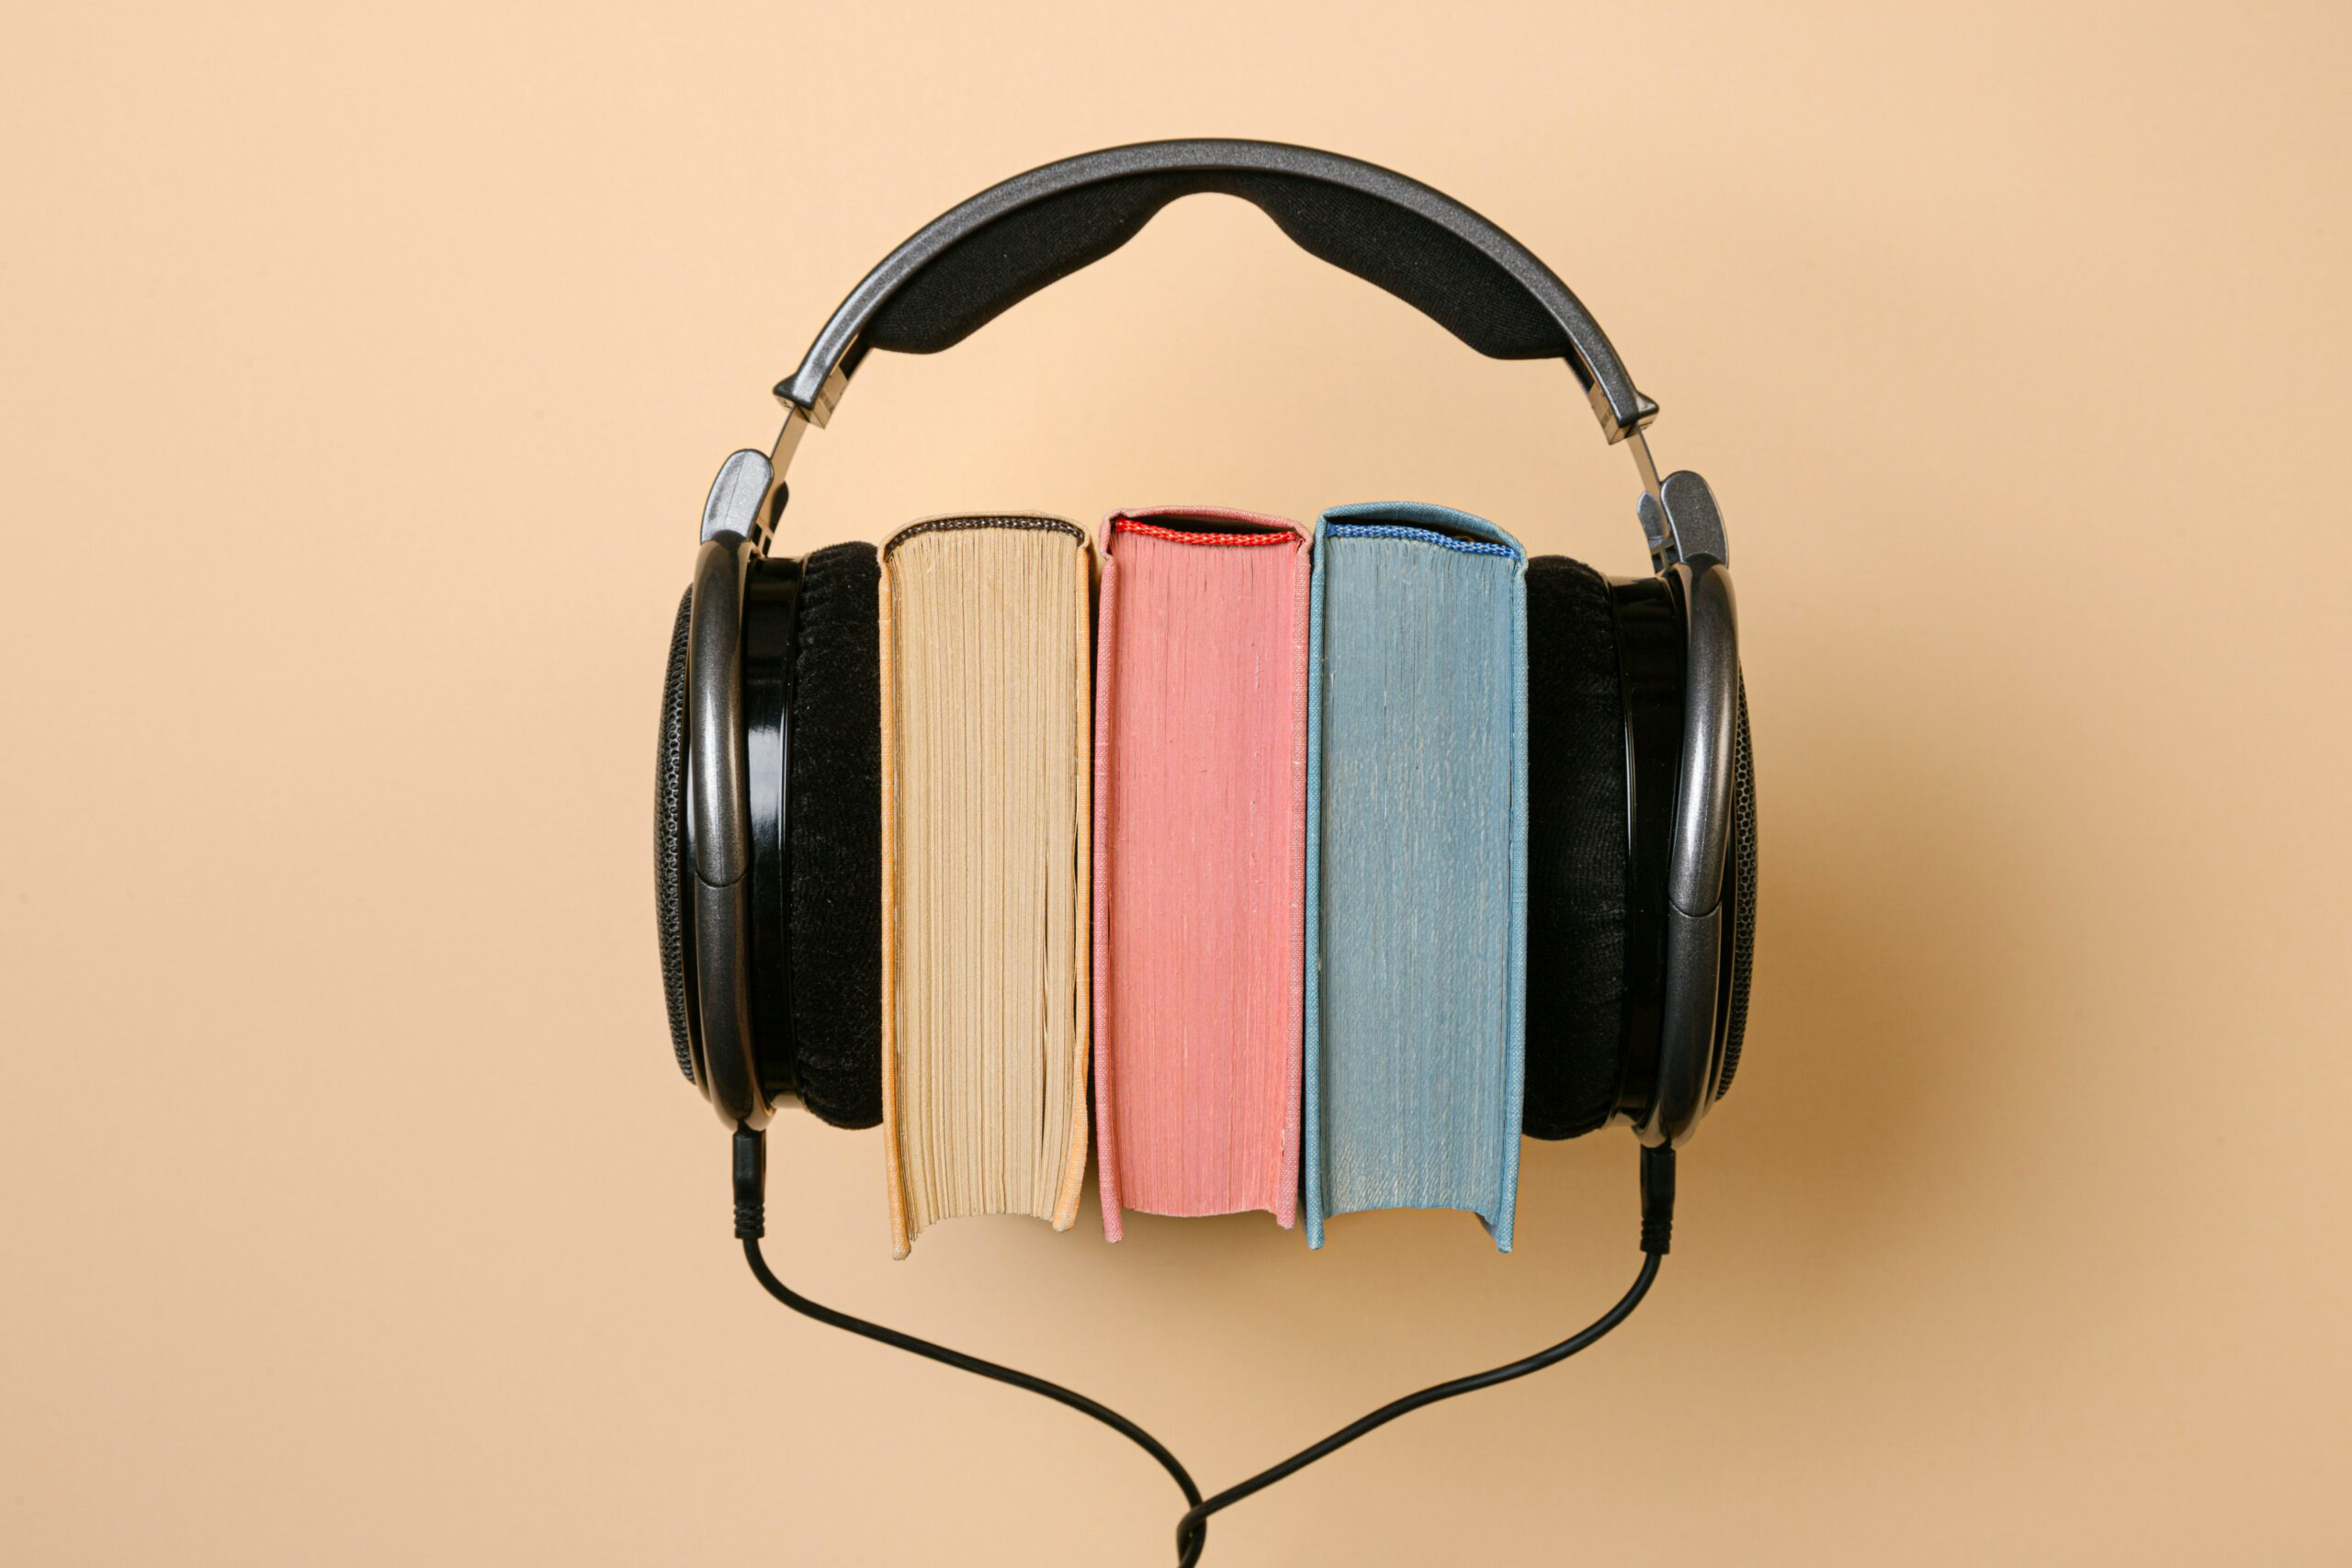 How to create an audiobook for itunes